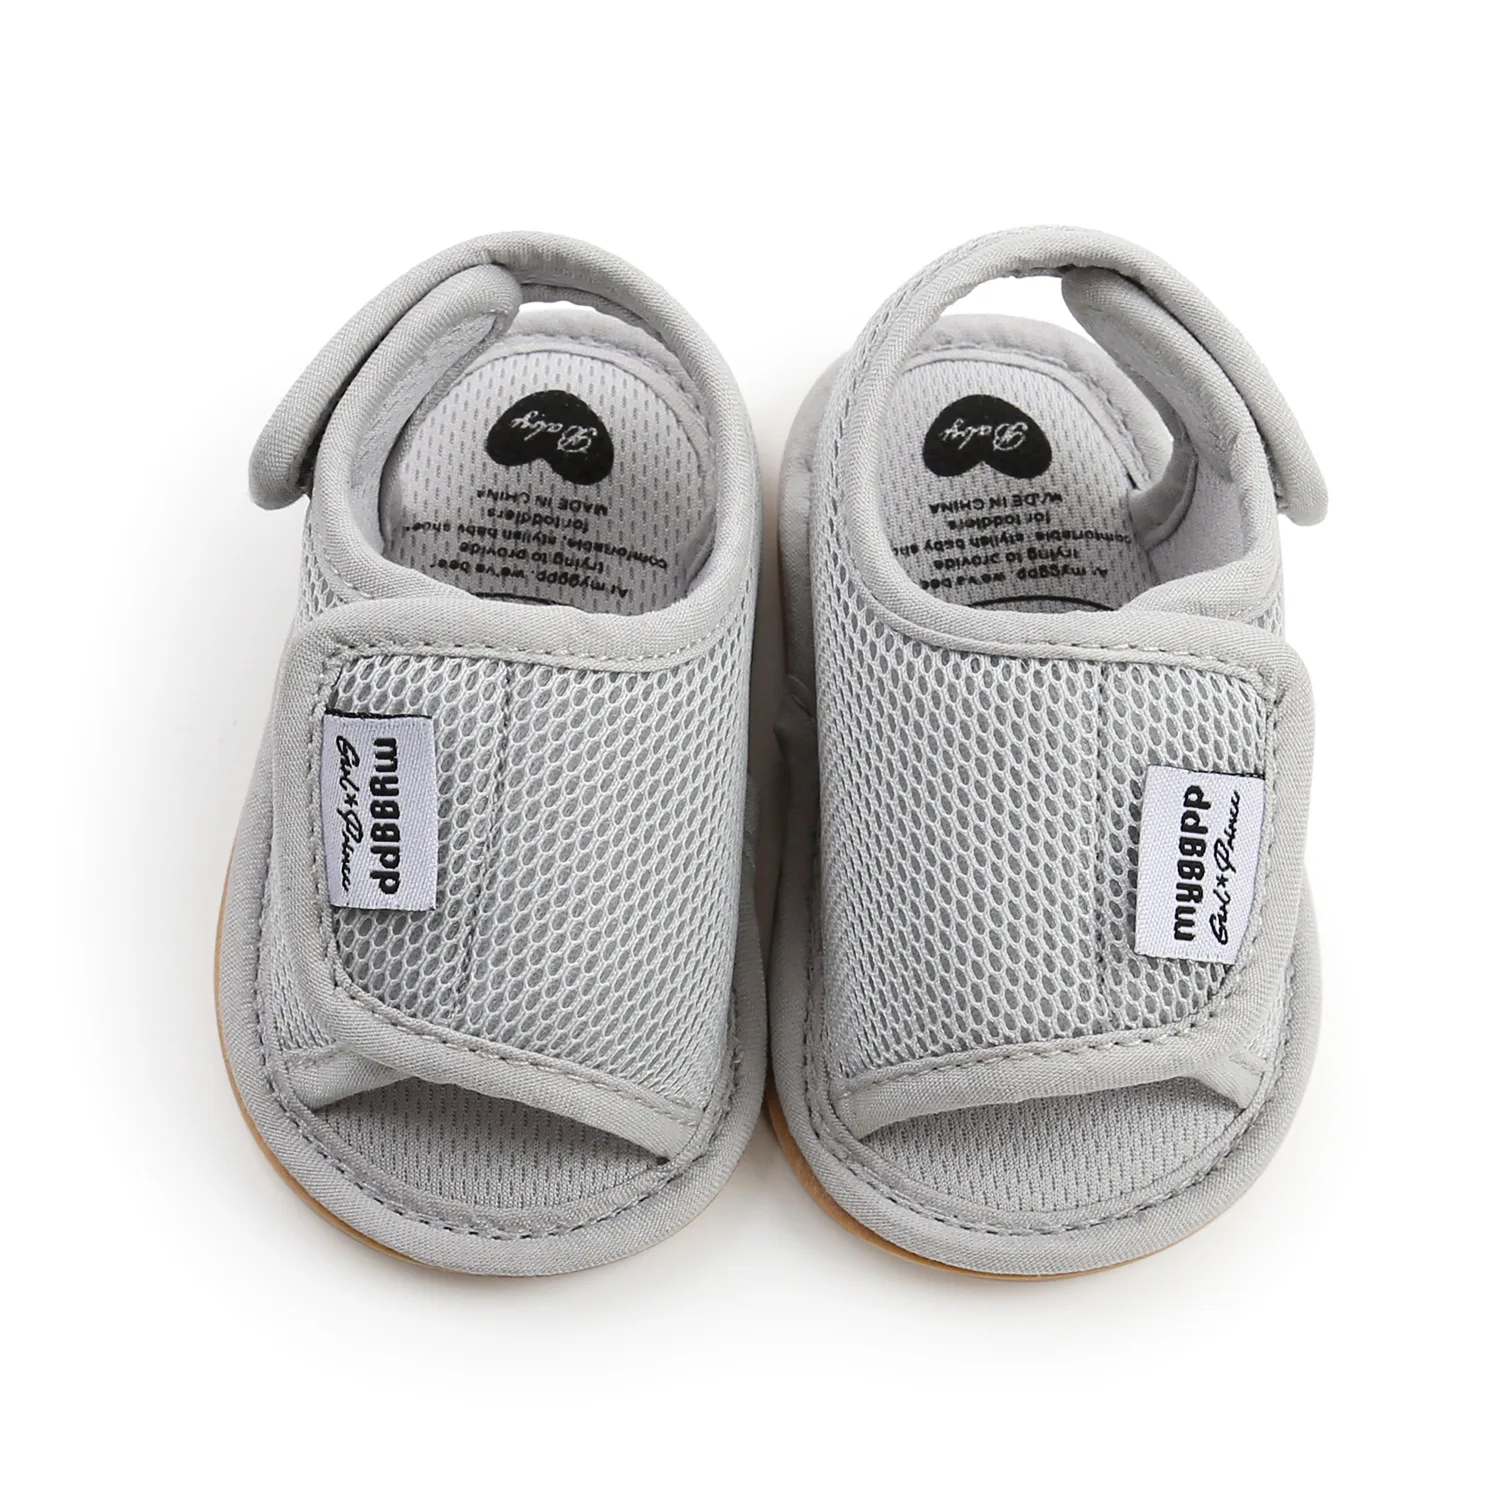 

2021 Summer Style Baby Sandals Soft TPR Sole Infants First Walkers Toddler Crib Shoes Solid Color Baby Clogs Beach Shoes